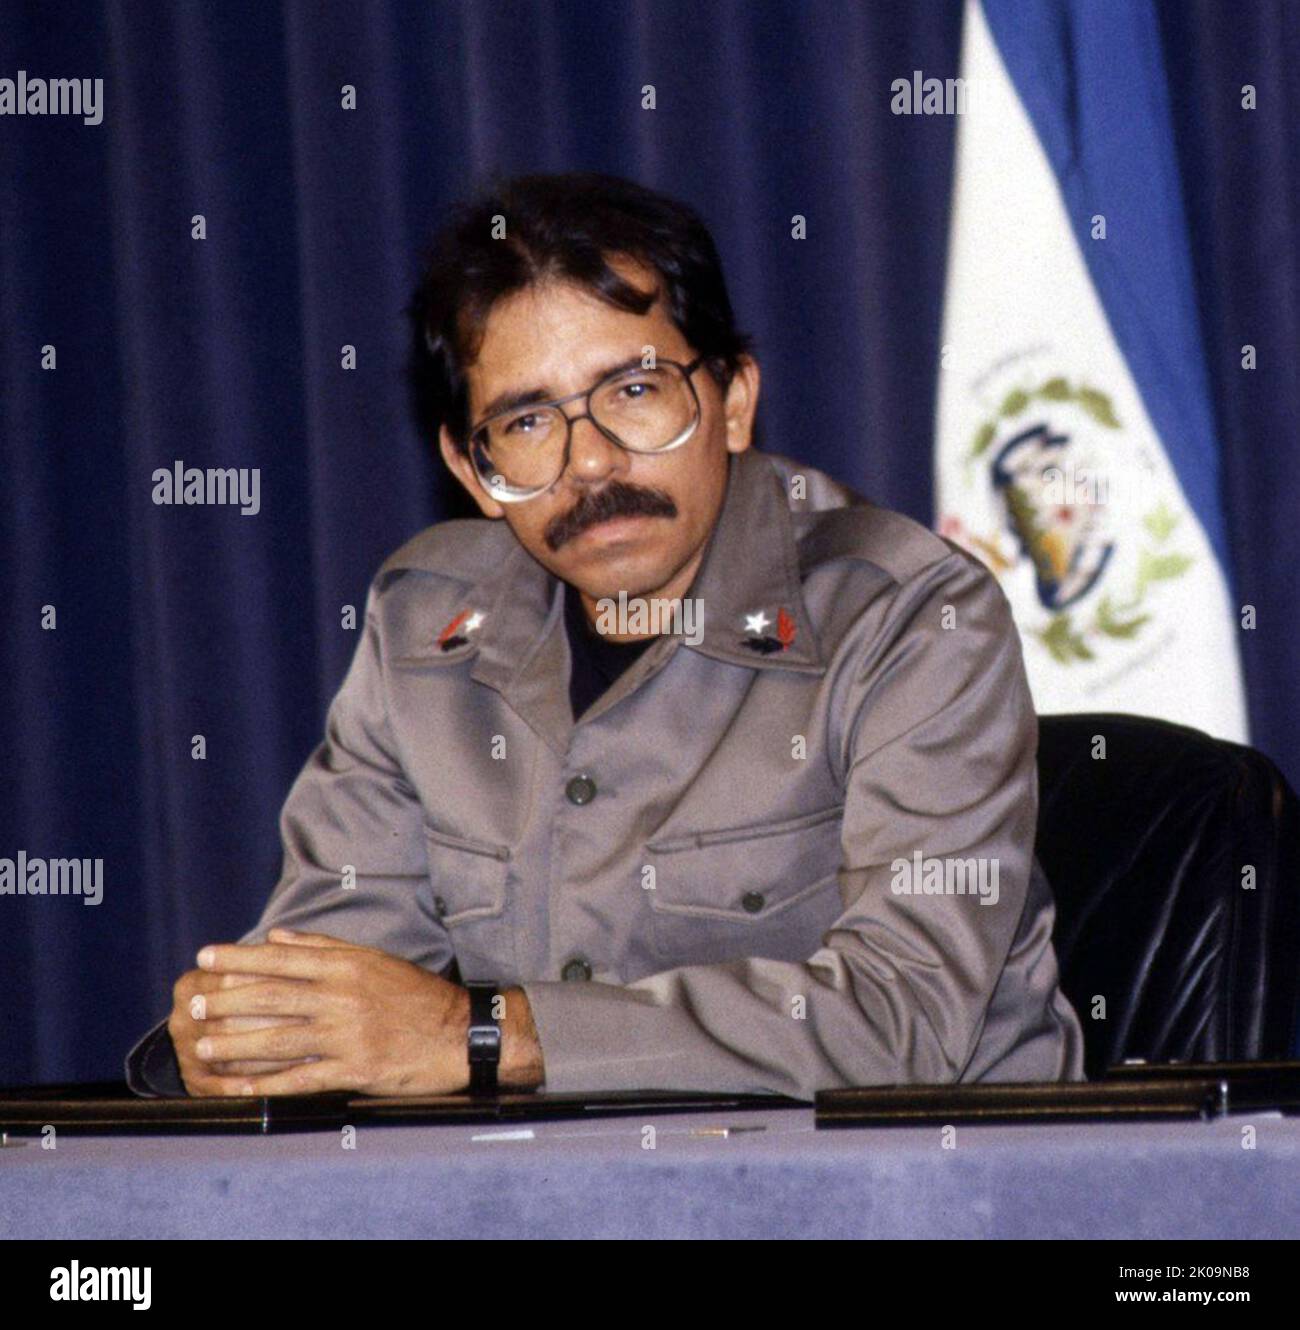 Jose Daniel Ortega (born 11 November 1945) Nicaraguan politician serving as President of Nicaragua since 2007. Previously, he was leader of Nicaragua from 1979 to 1990, first as Coordinator of the Junta of National Reconstruction (1979-1985) and then as President of Nicaragua (1985-1990). A leader in the Sandinista National Liberation Front, he implemented policies to achieve leftist reforms across Nicaragua Stock Photo